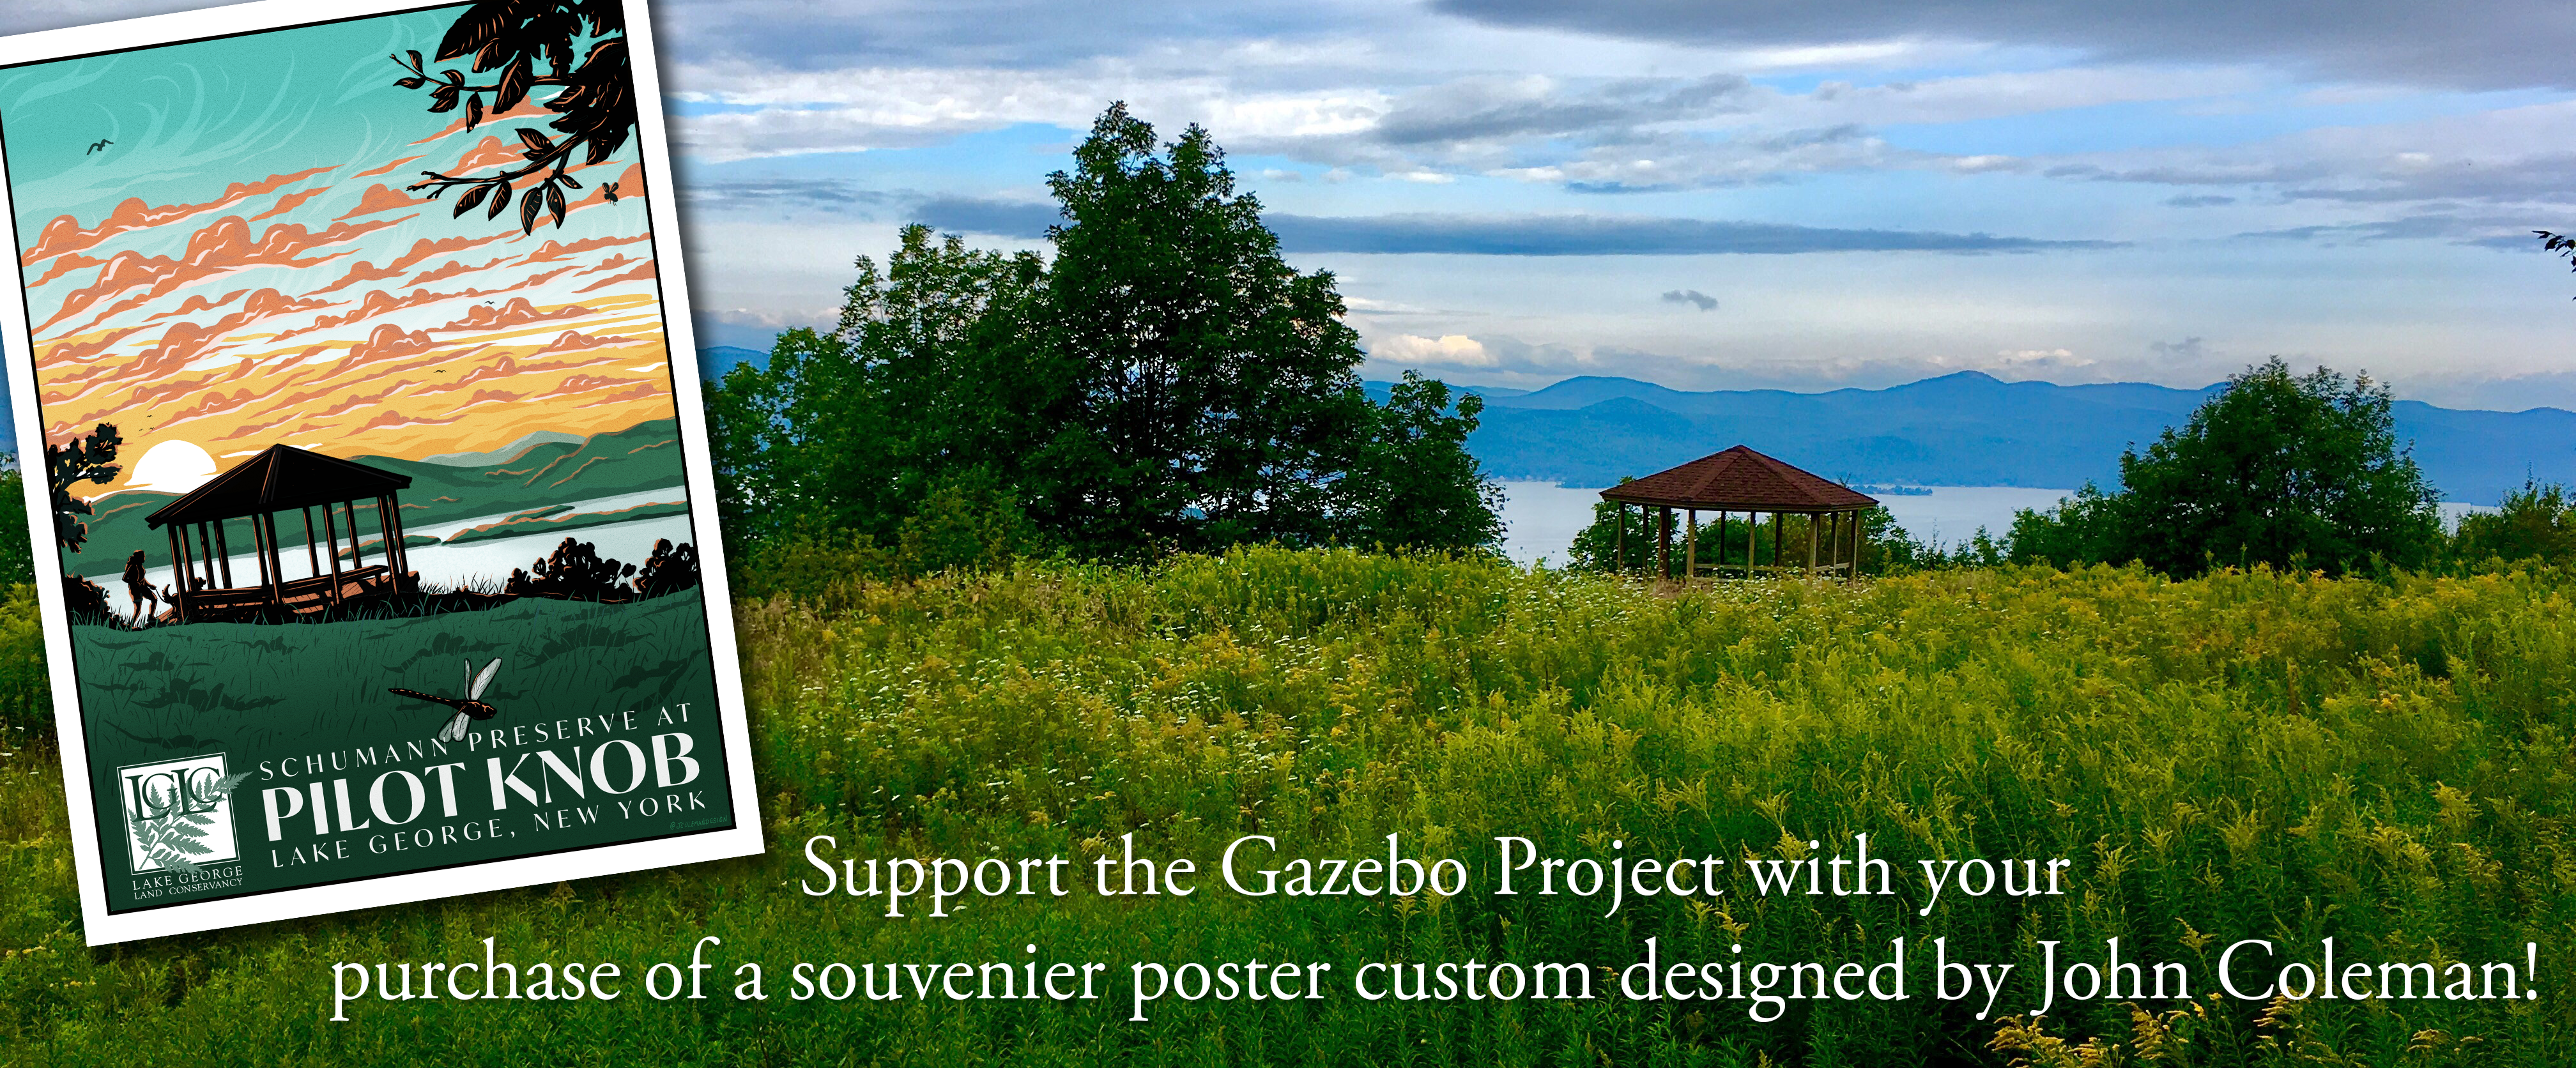 "Get a souvenir poster custom designed by John Coleman!" Graphic poster of the gazebo overlays a photograph of a field of flowering goldenrod, the brown peaked roof of a small gazebo visible above the flowers. Taller trees stand beyond the field, and a lake can be seen in the distance.